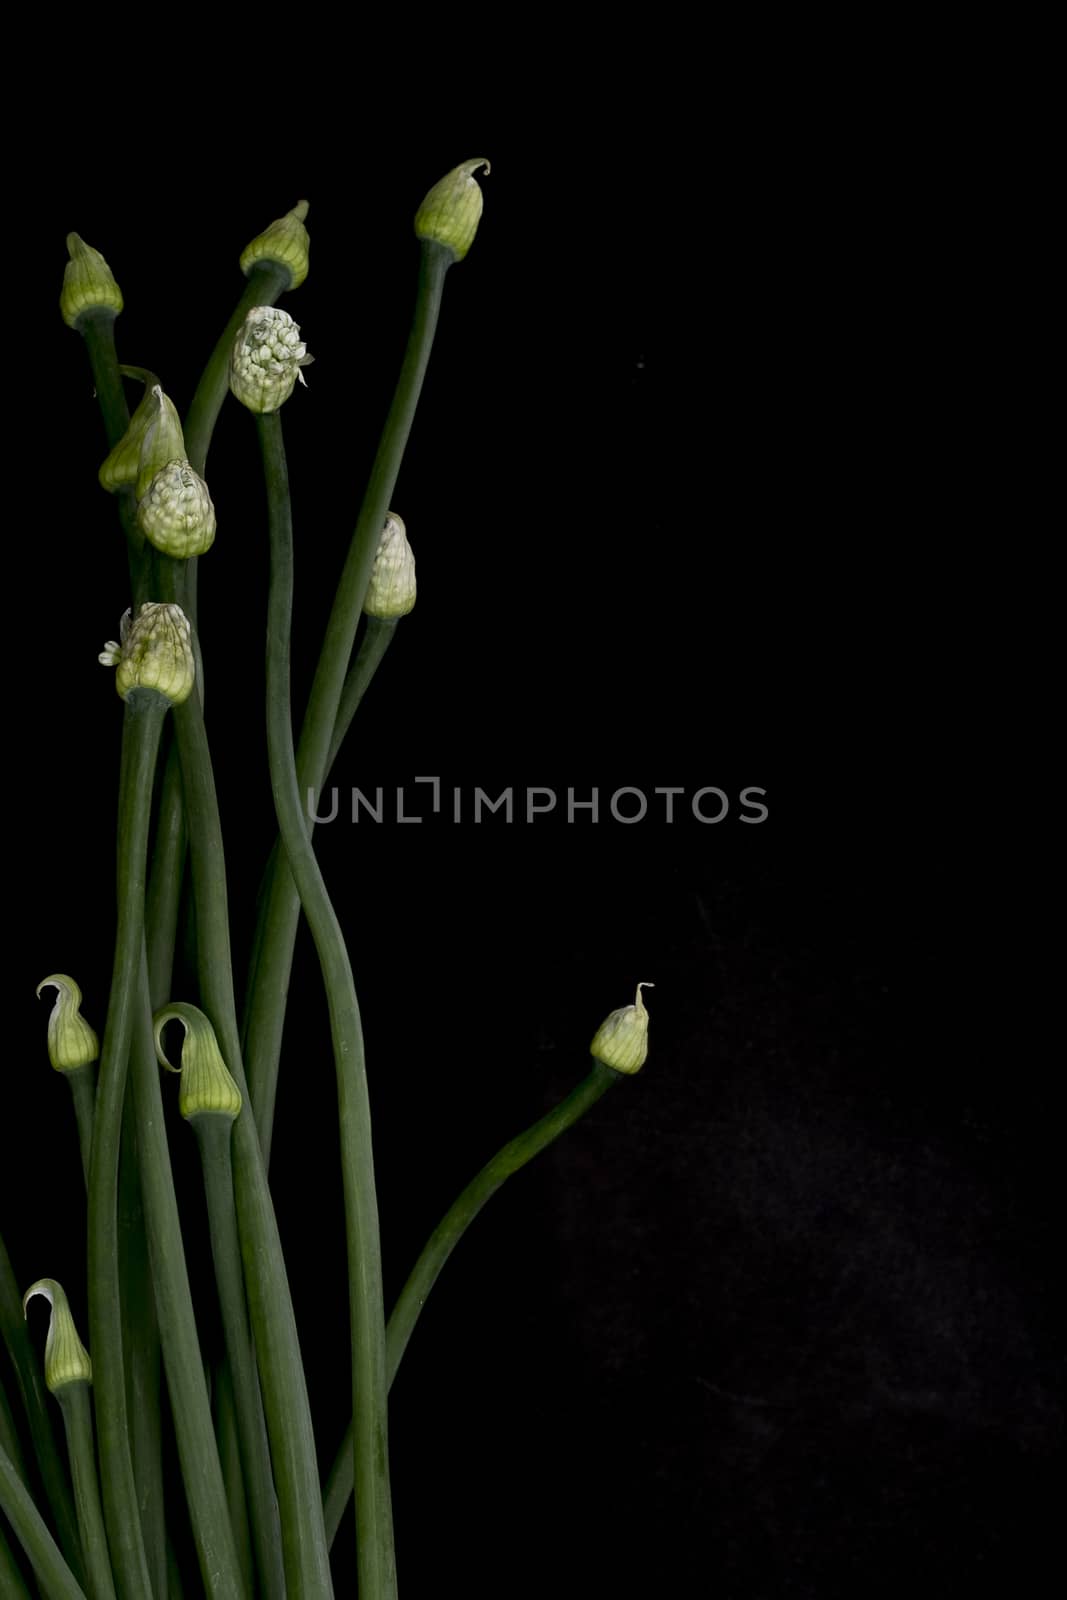 Chinese garlic flowers by Nawoot